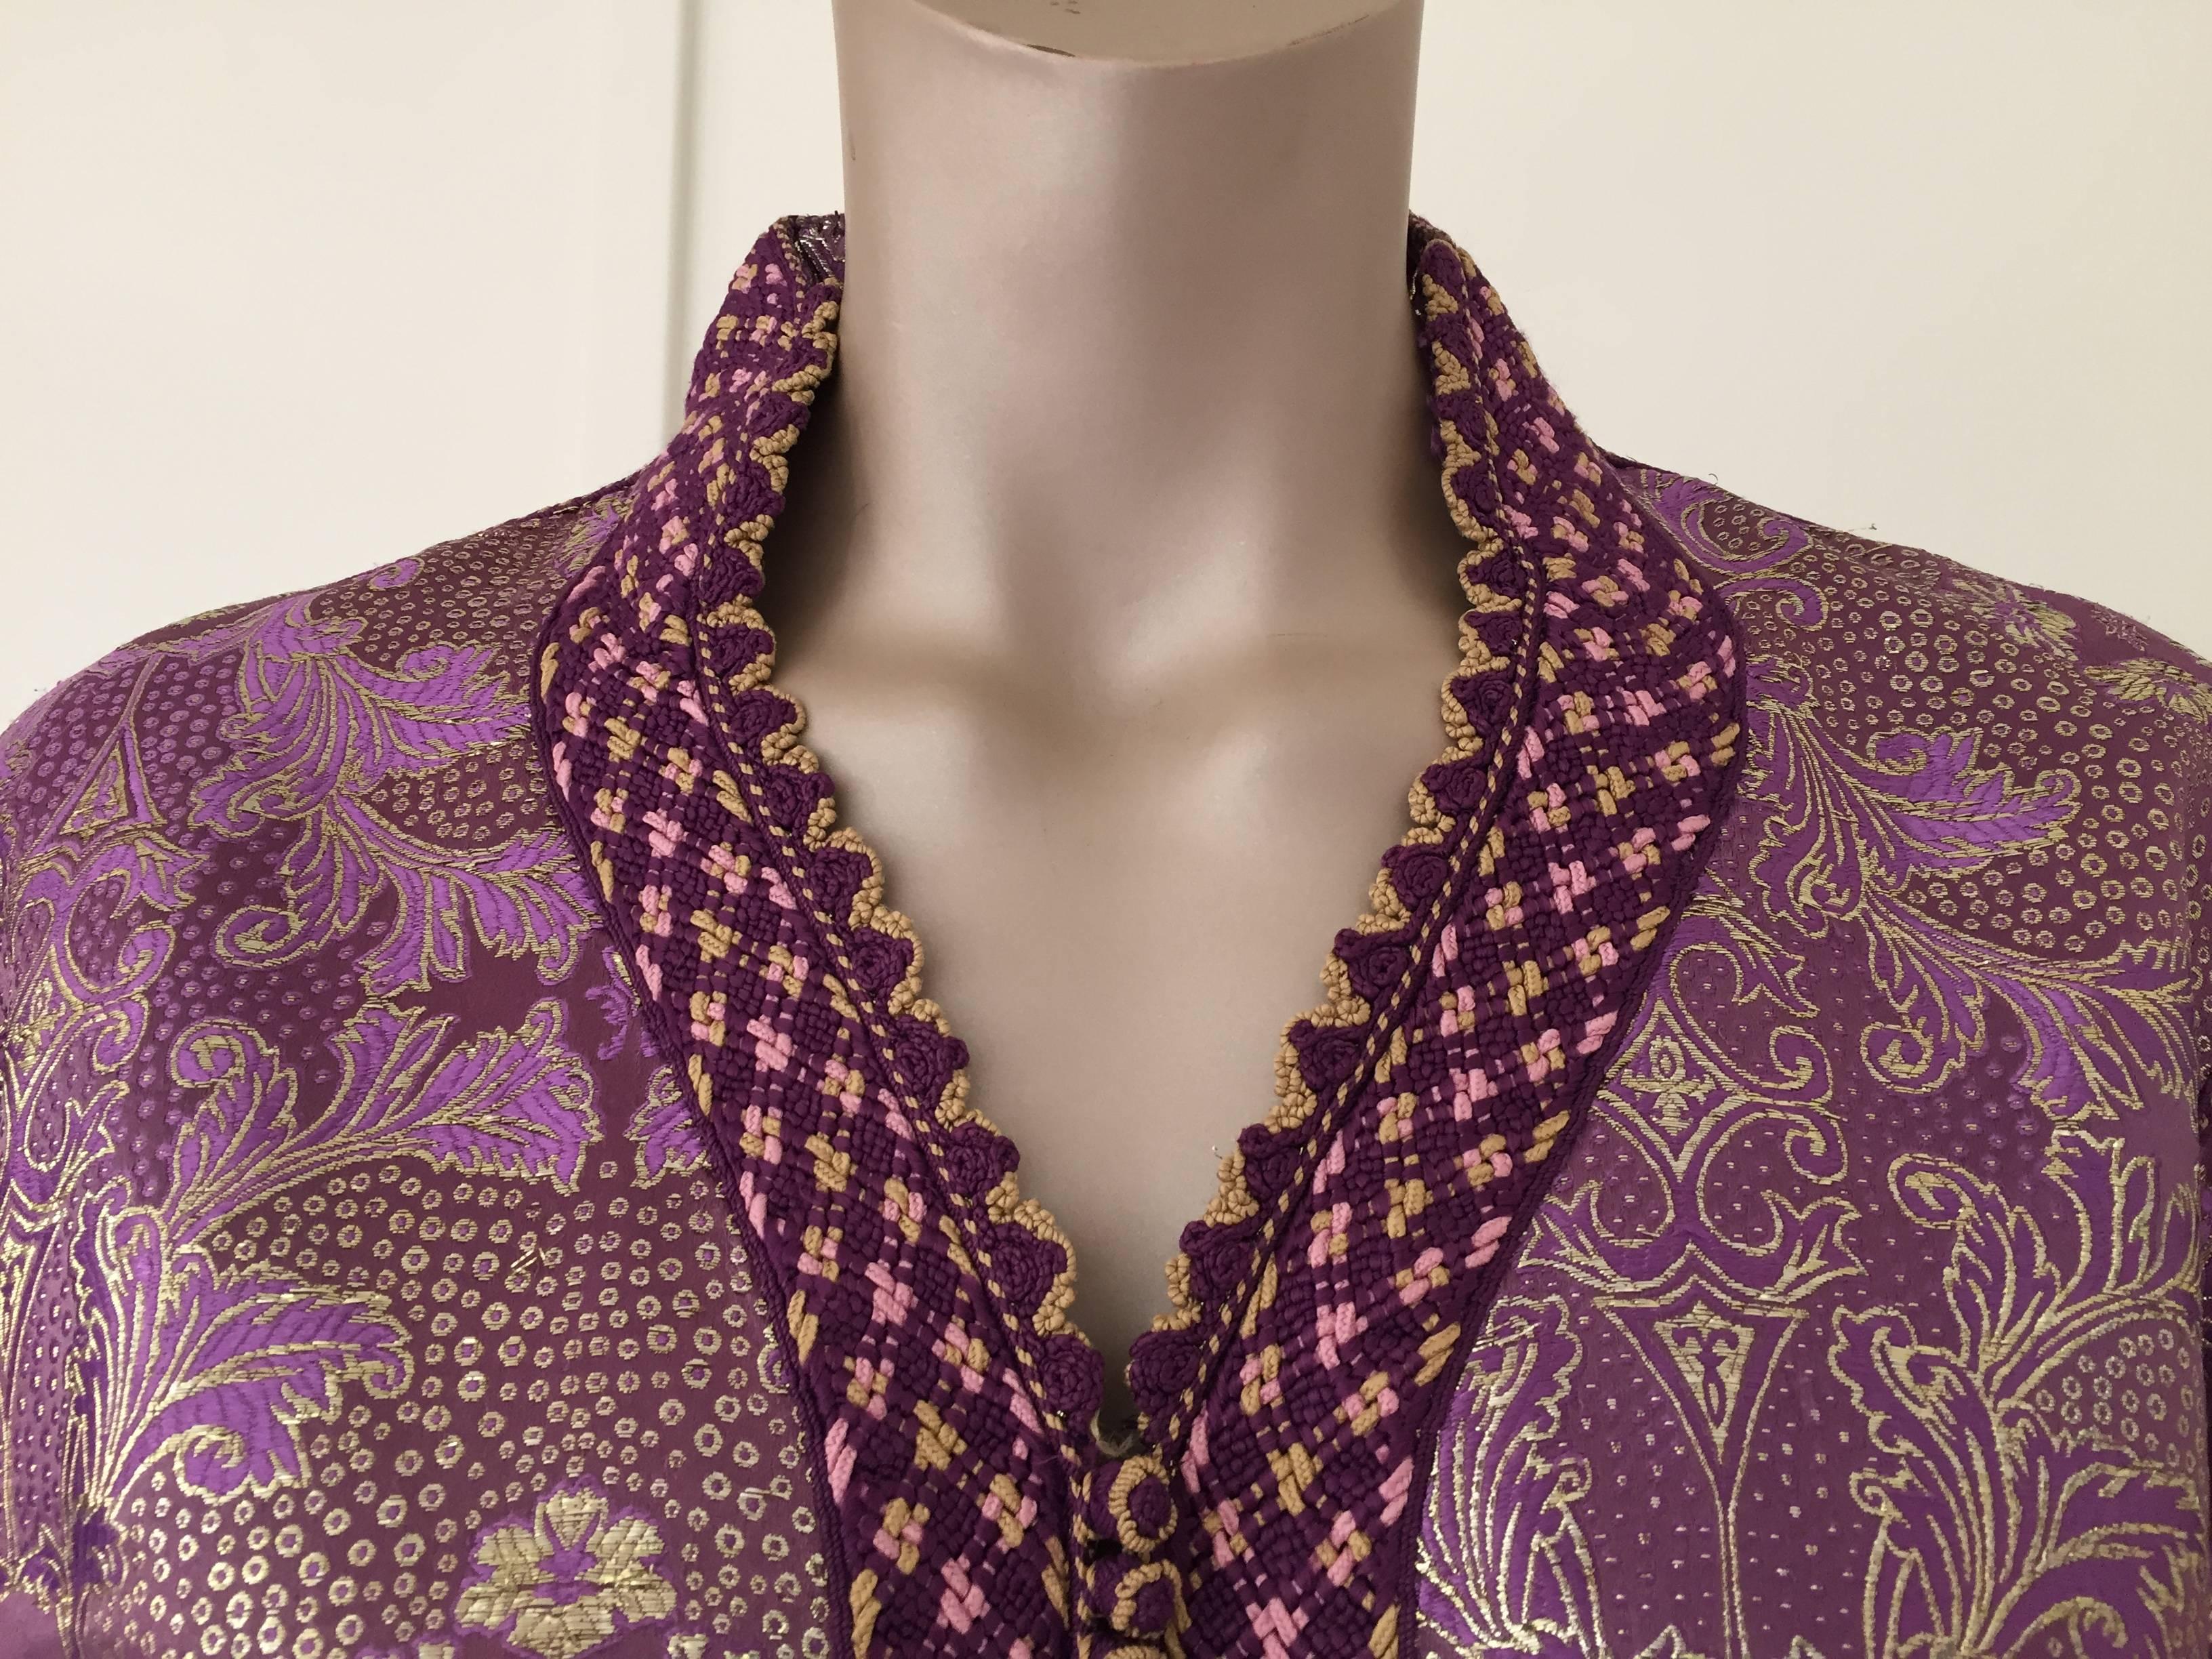 Hand-Crafted Moroccan Caftan, Purple Color Lame Kaftan Size M to L